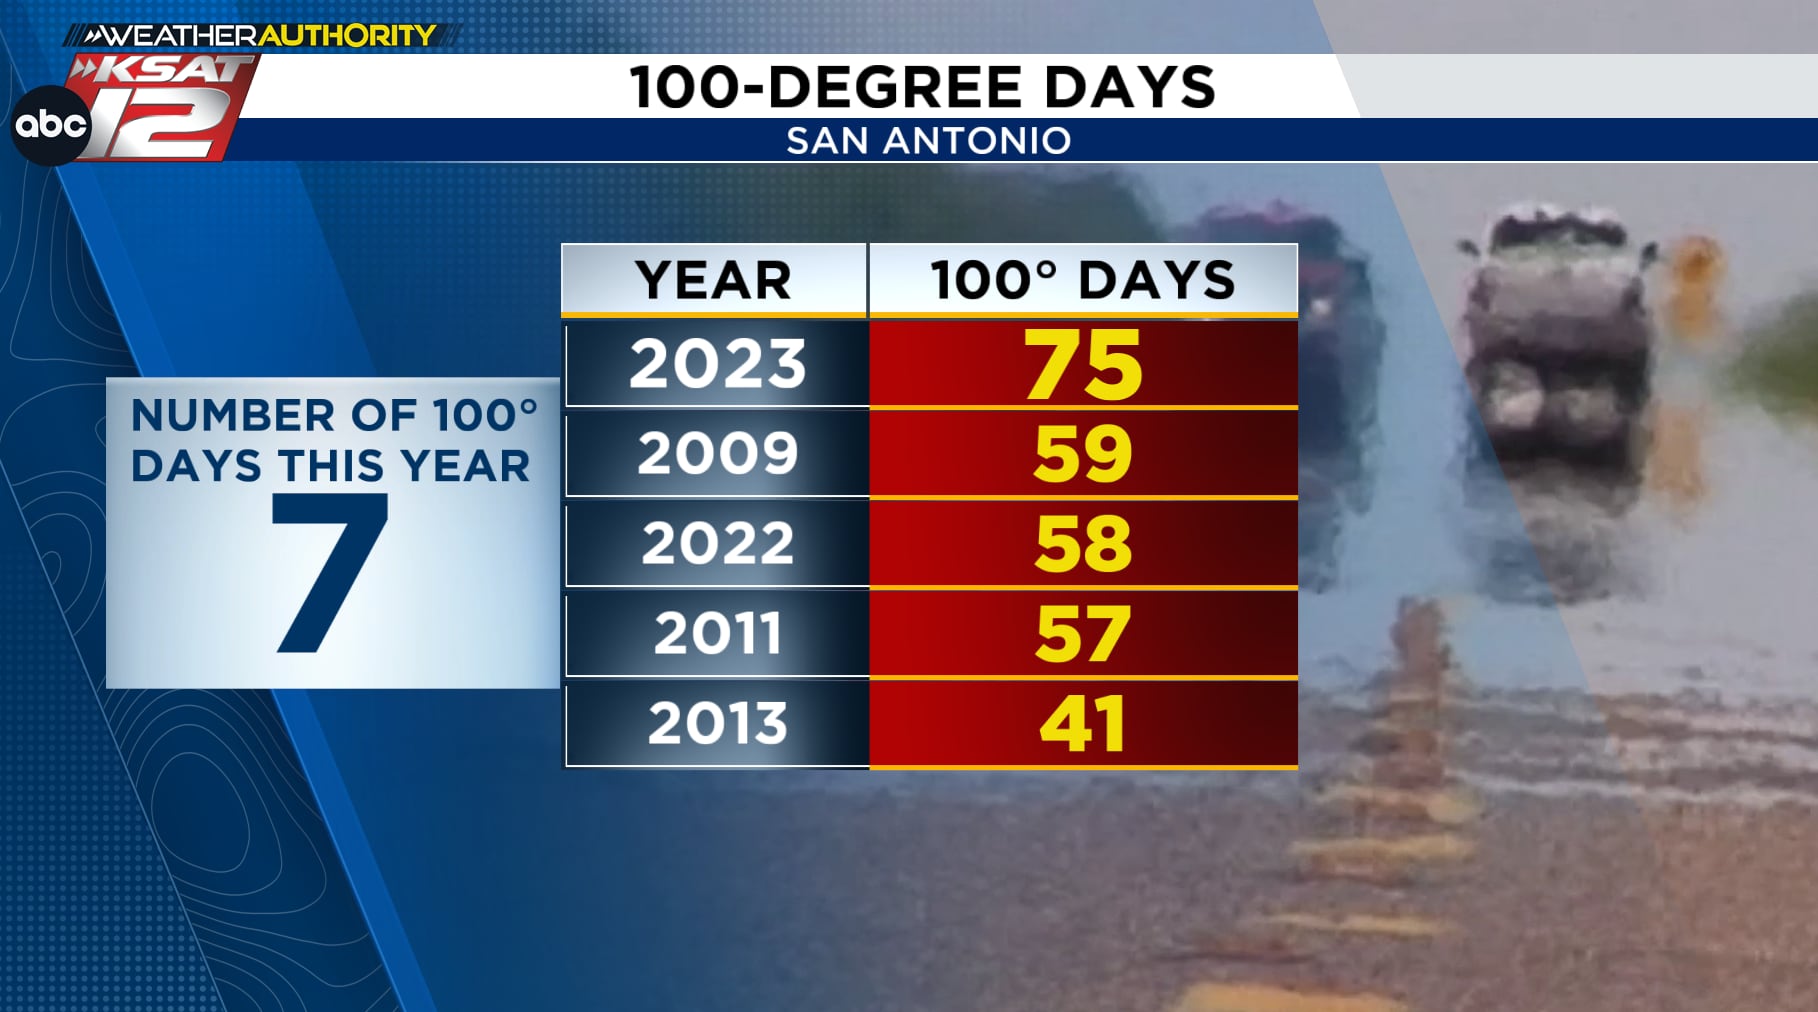 Number of 100° days as of 6/24/24